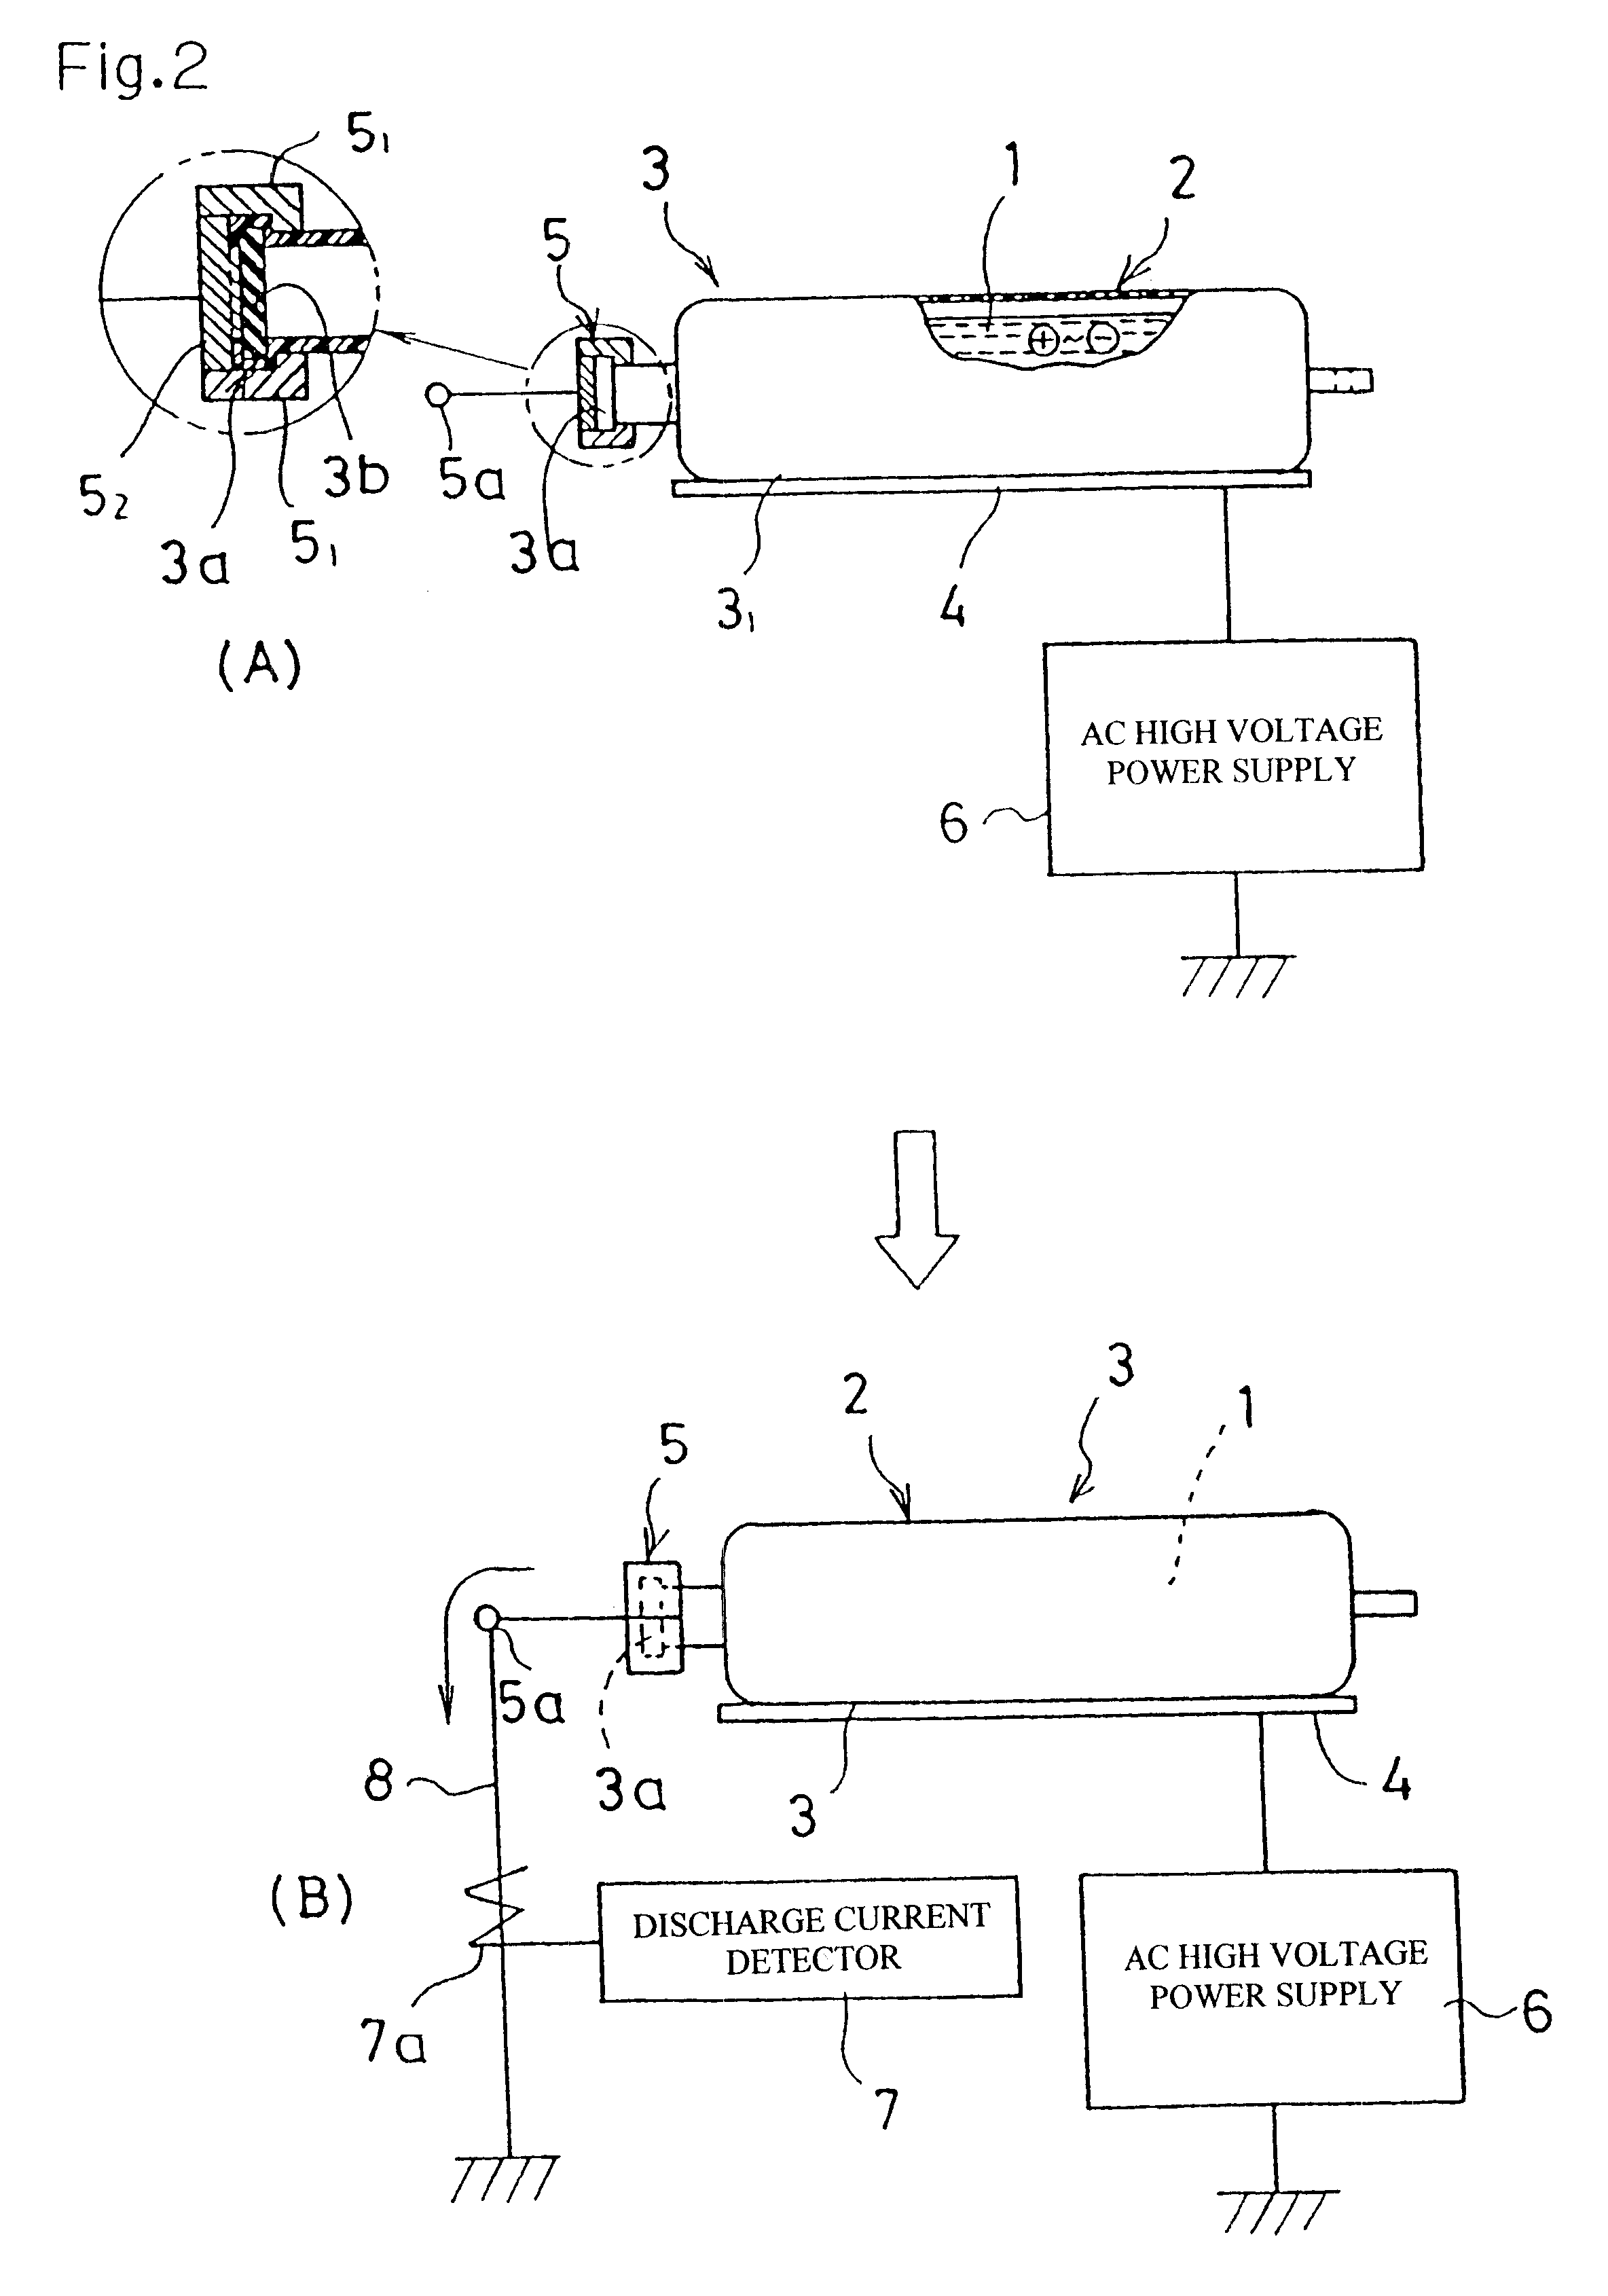 Method for inspecting hermetically sealed packages